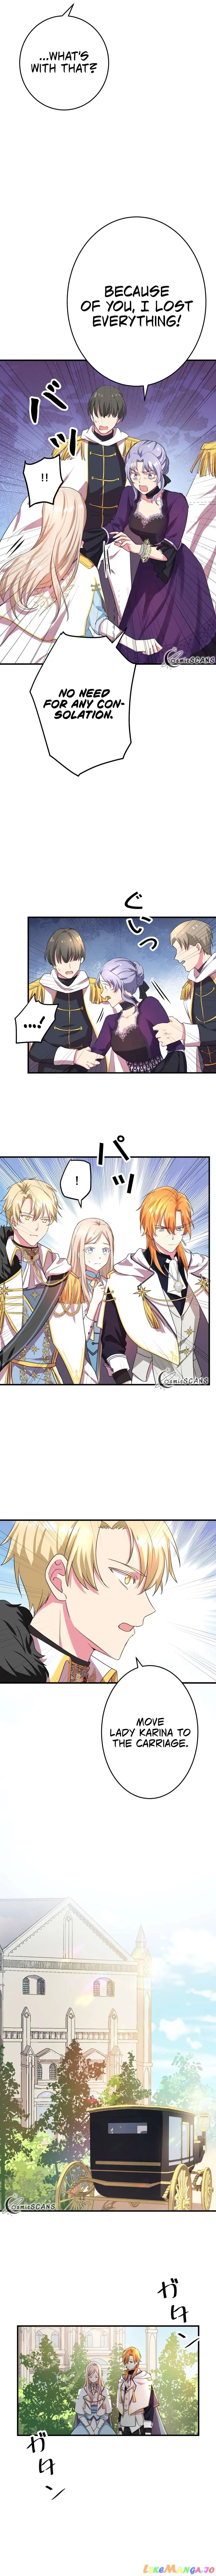 Even though I become a side character, I’m being adored by an overprotective duke chapter 28